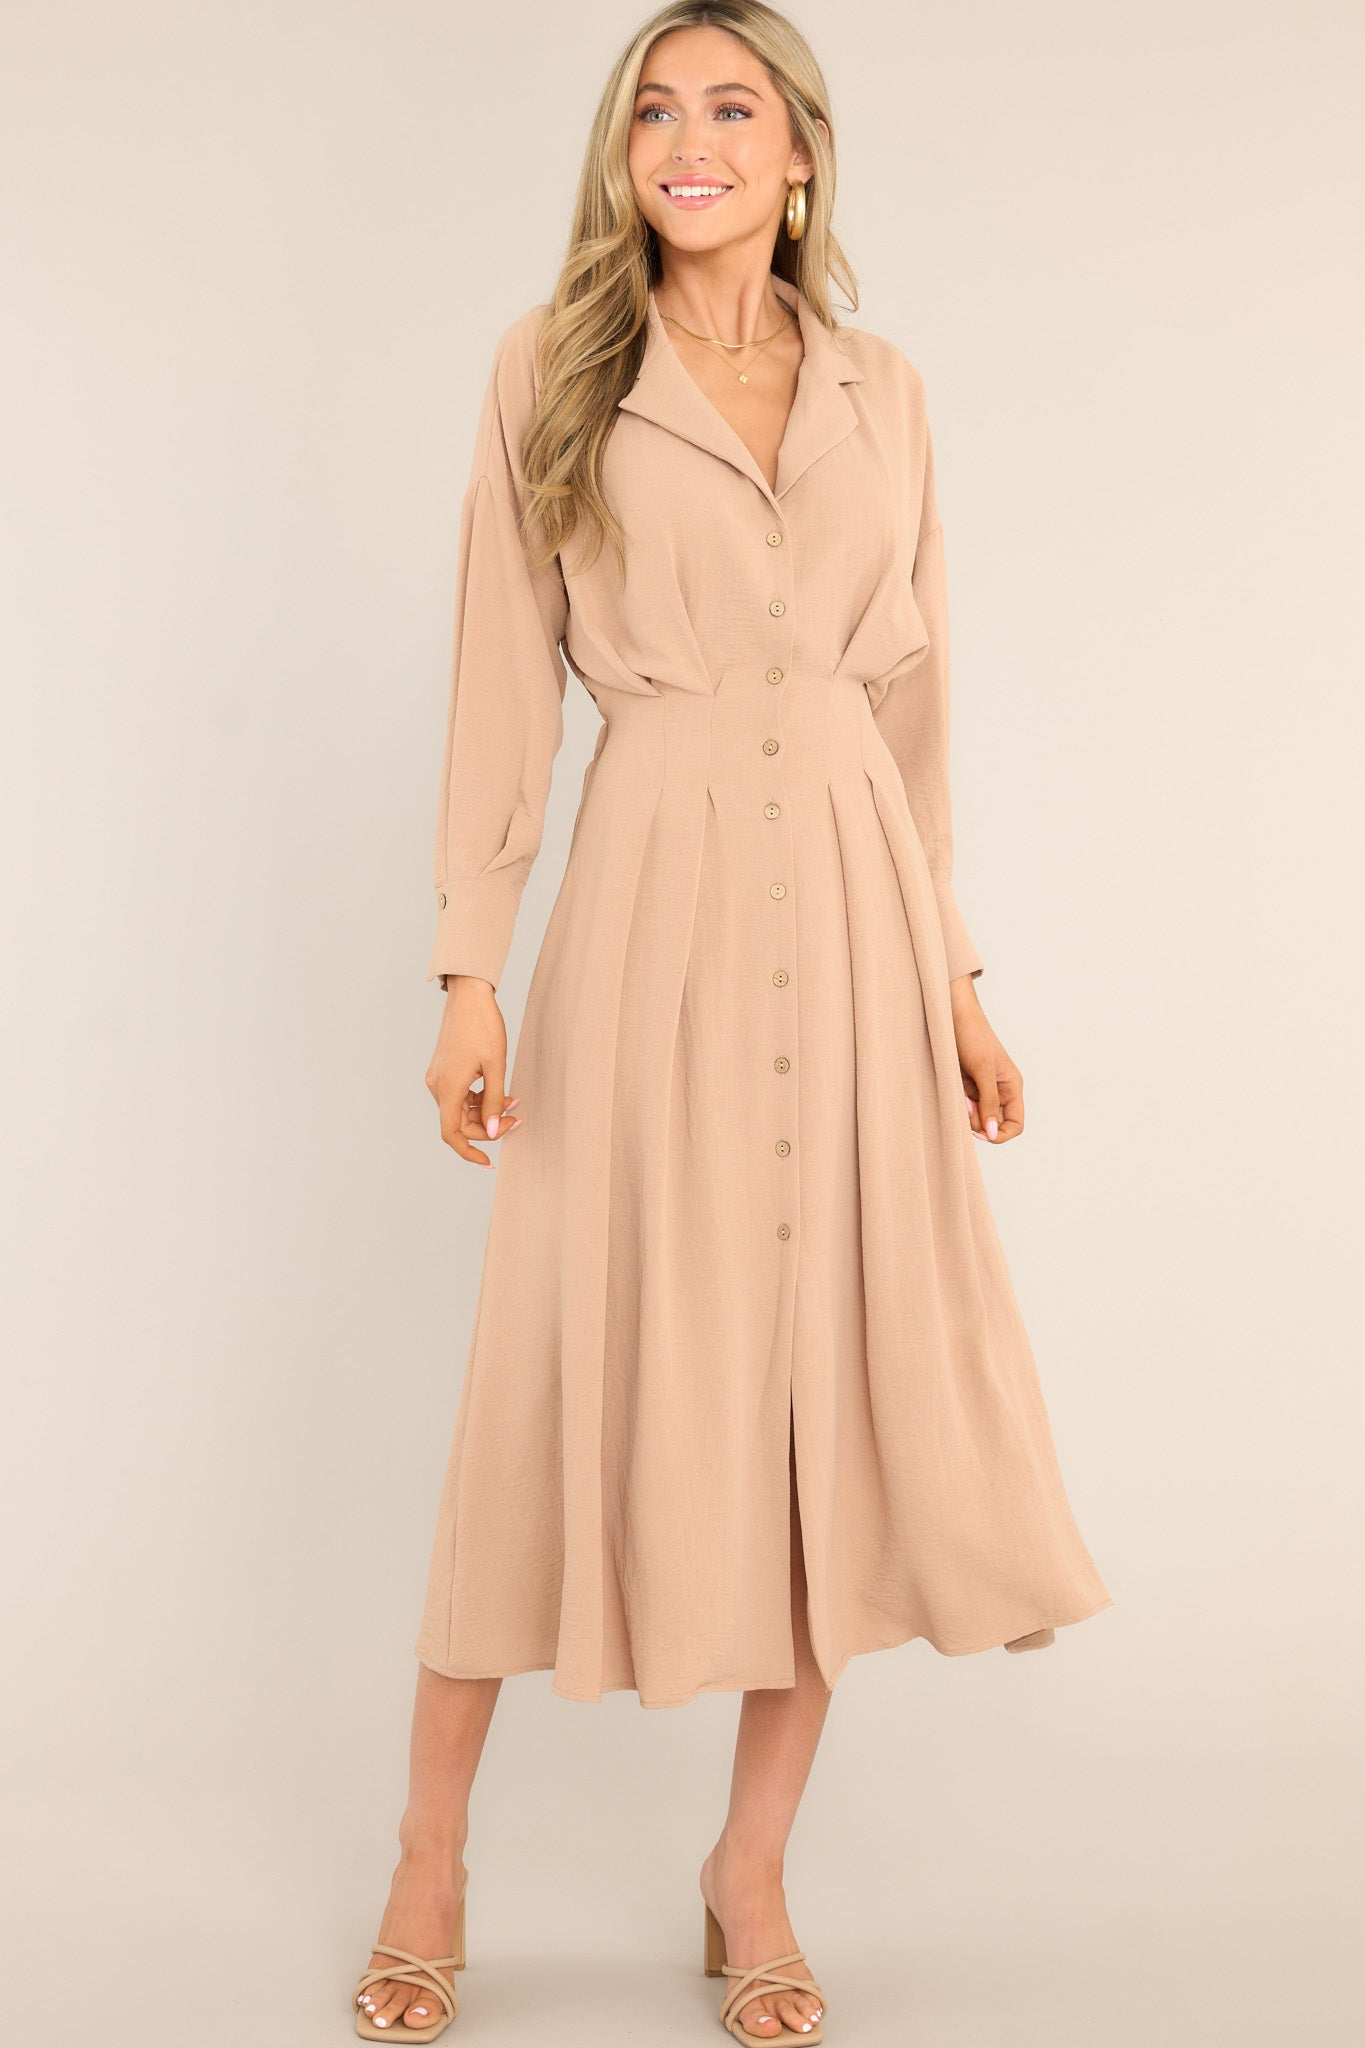 Full body view of this dress that features a collard neckline, functional buttons going down the front, long sleeves with button closures, and a pleated design at the waist.